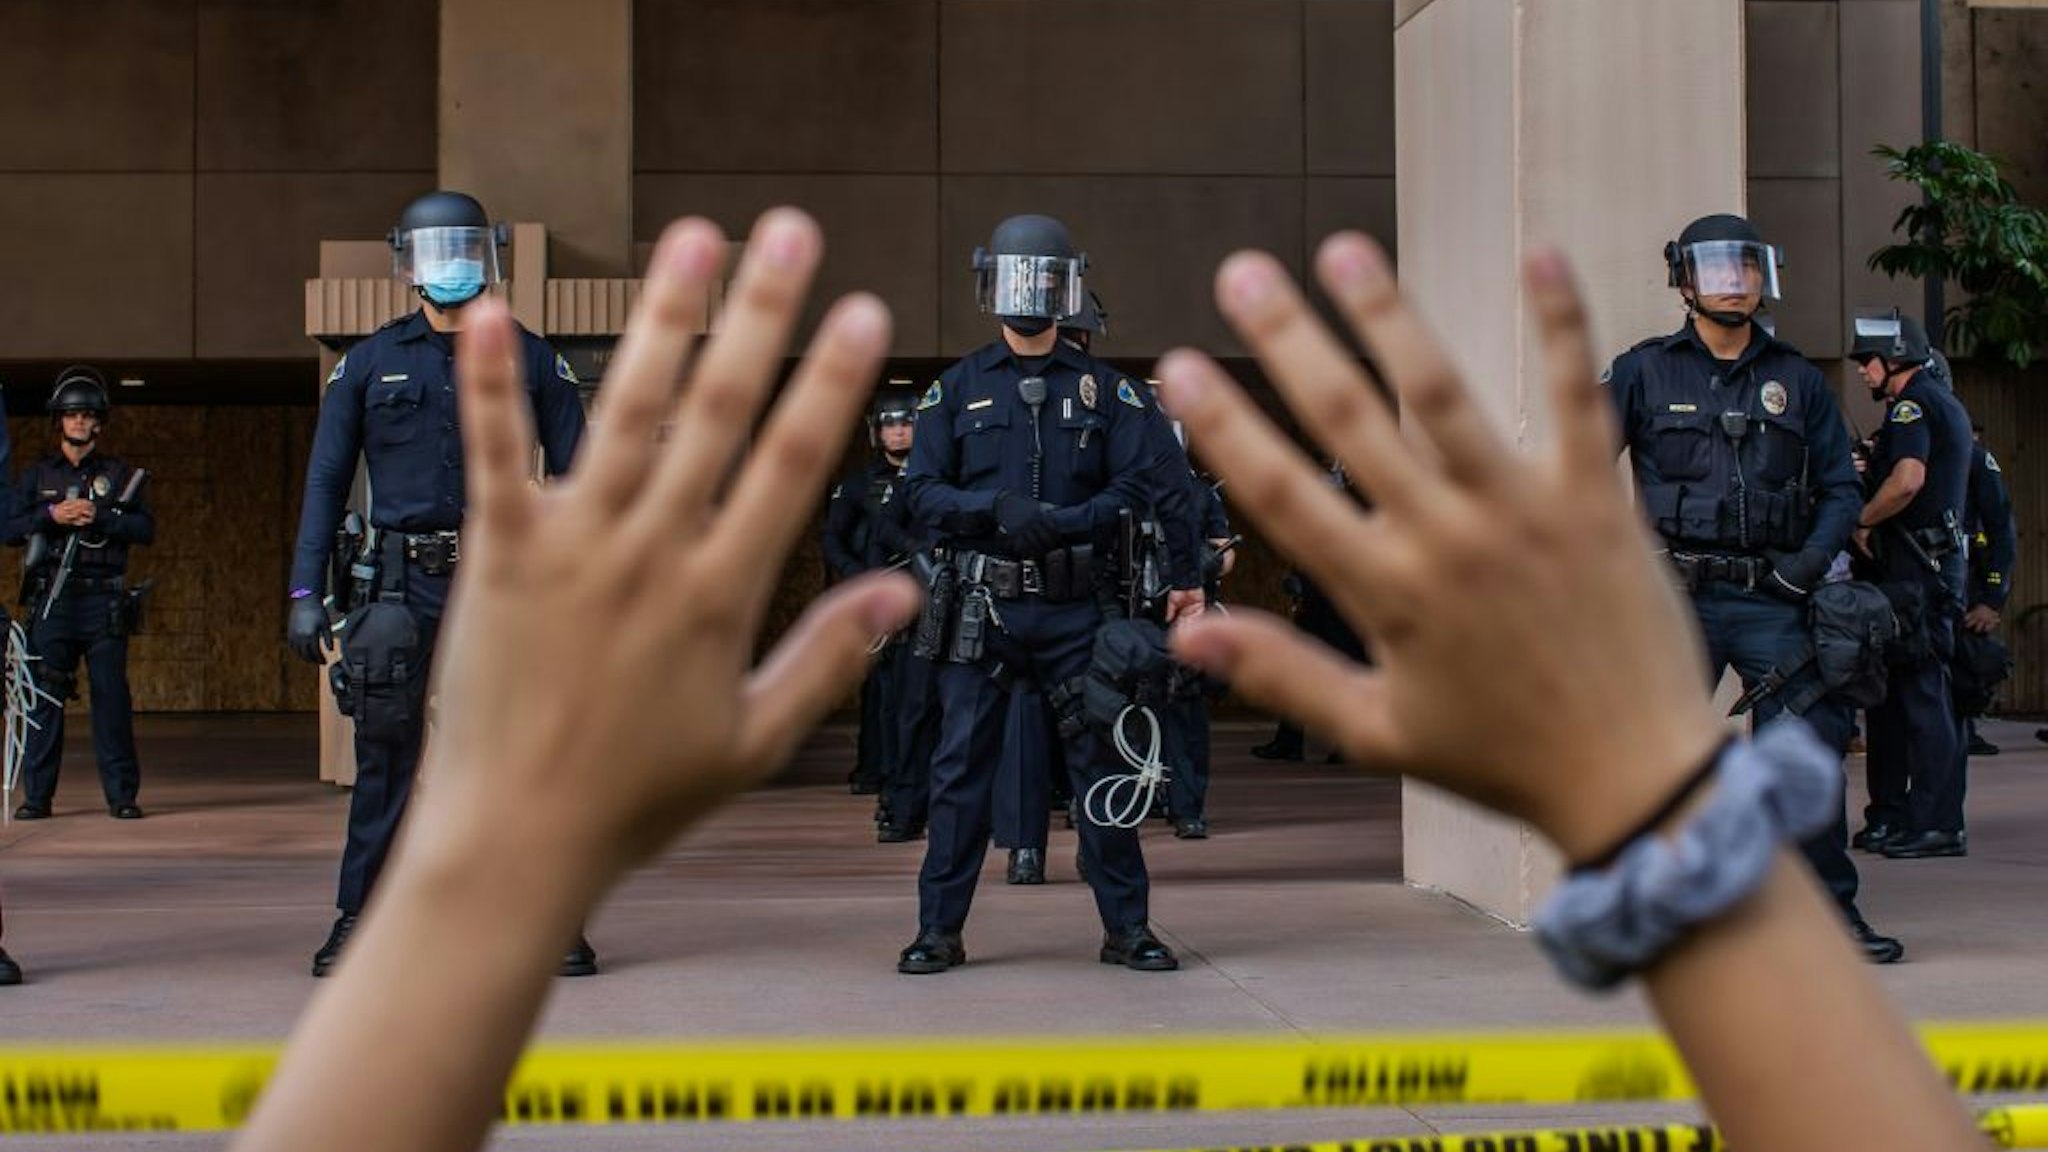 A demonstrator holds her hands up while she kneels in front of the Police at the Anaheim City Hall on June 1, 2020 in Anaheim, California, during a peaceful protest over the death of George Floyd. - Major US cities -- convulsed by protests, clashes with police and looting since the death in Minneapolis police custody of George Floyd a week ago -- braced Monday for another night of unrest. More than 40 cities have imposed curfews after consecutive nights of tension that included looting and the trashing of parked cars.